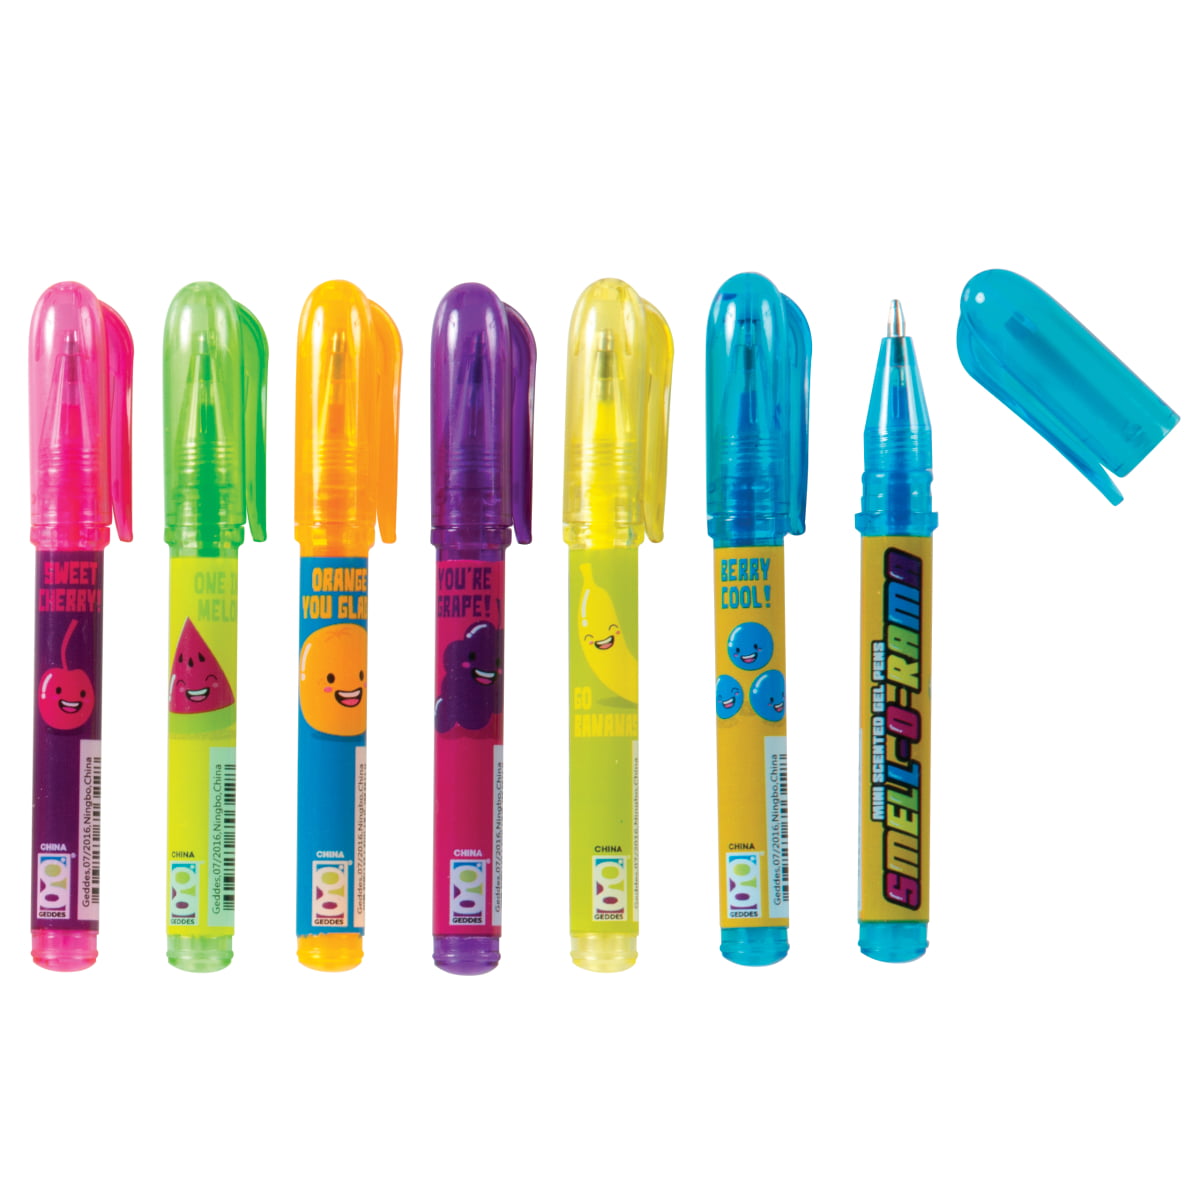 Smell-O-Rama Mini Scented Gel Pen Case Pack of 60